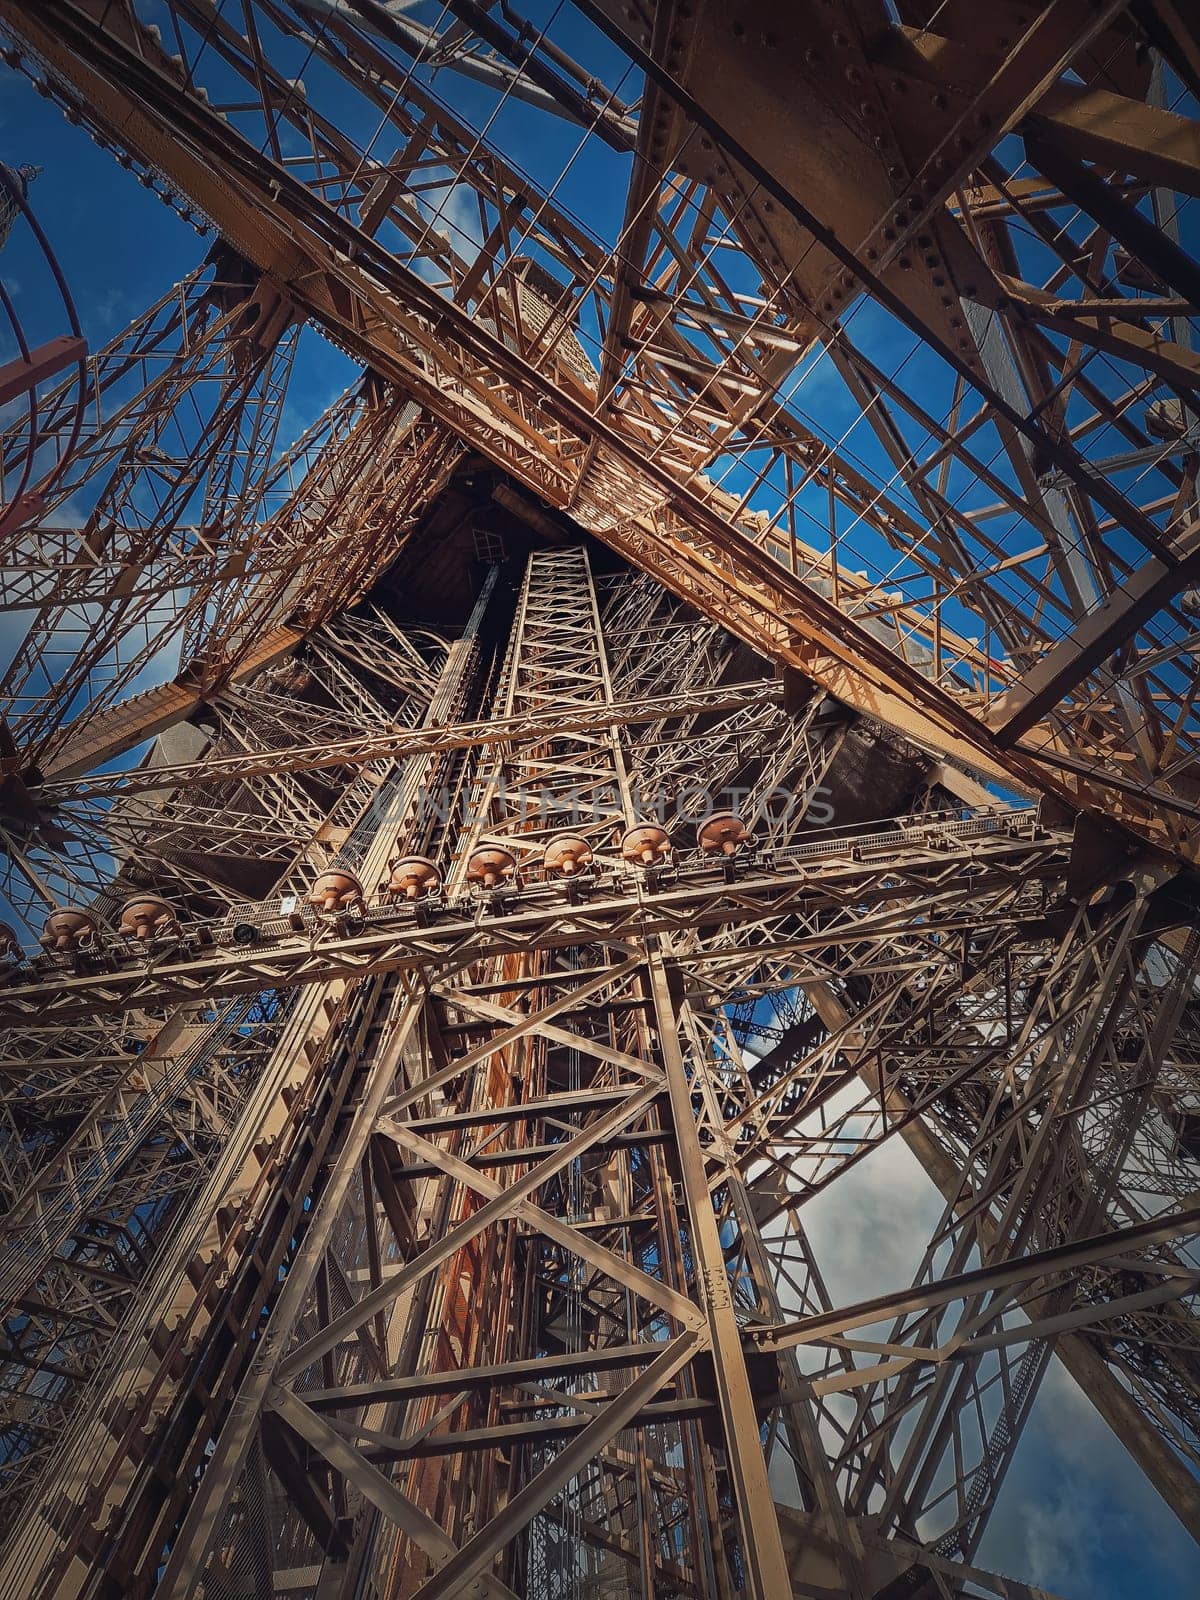 Eiffel Tower architecture details Paris, France. Underneath the metallic structure, steel elements with different geometric shapes